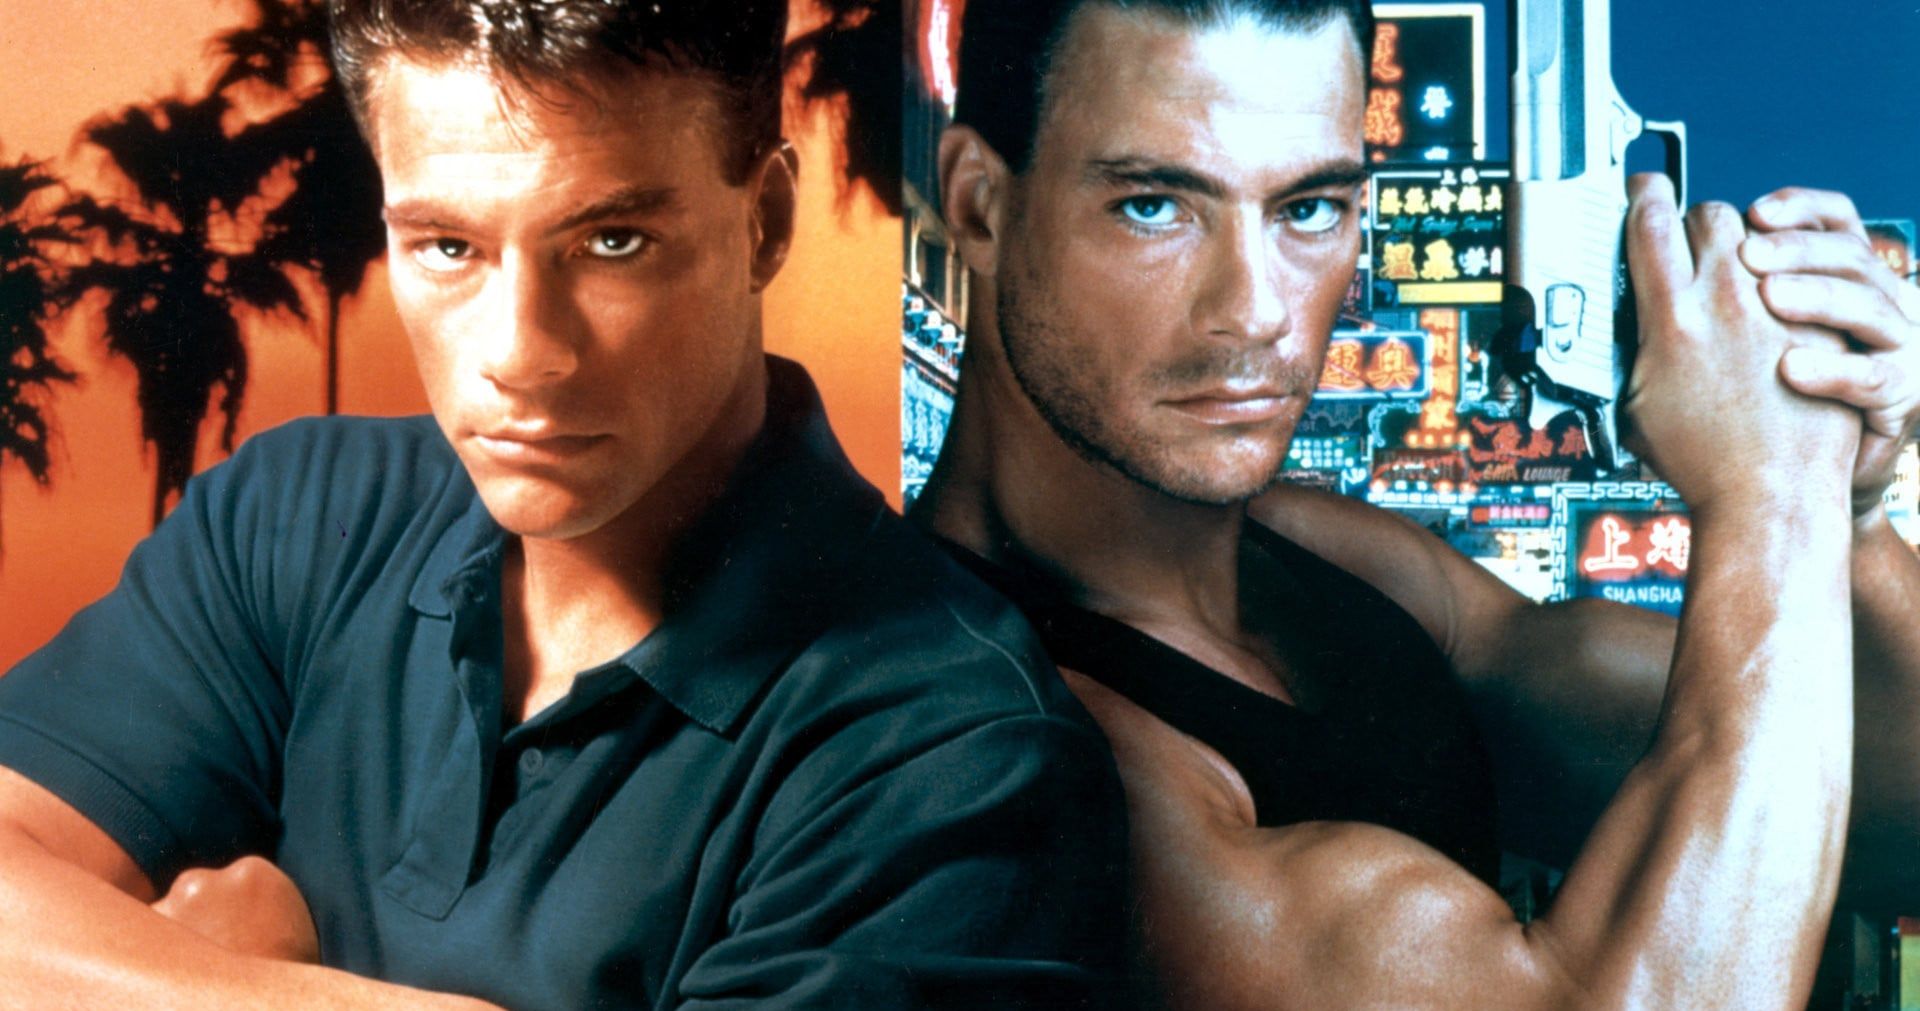 Jean-claude Van Damme's Double Impact Gets a Special Edition Blu-ray with Tons of Extras